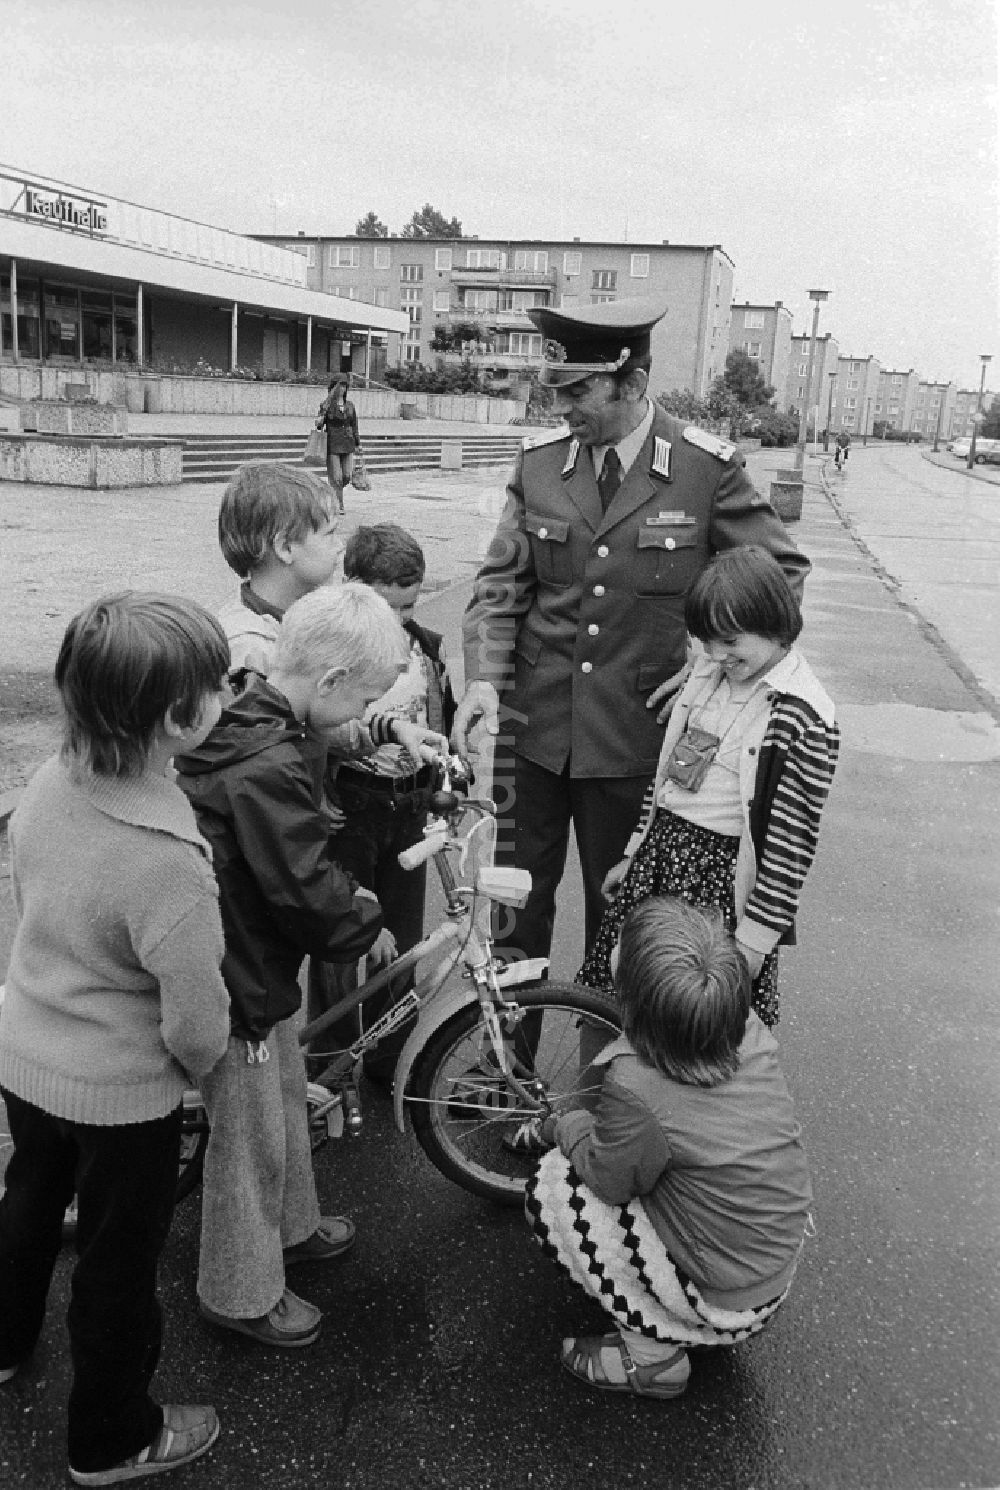 GDR photo archive: Berlin - A member of the People's Police / of segment authorised representative (ABV) with the road safety education in Berlin, the former capital of the GDR, German democratic republic. Here he controls the traffic suitability of a bicycle of the children